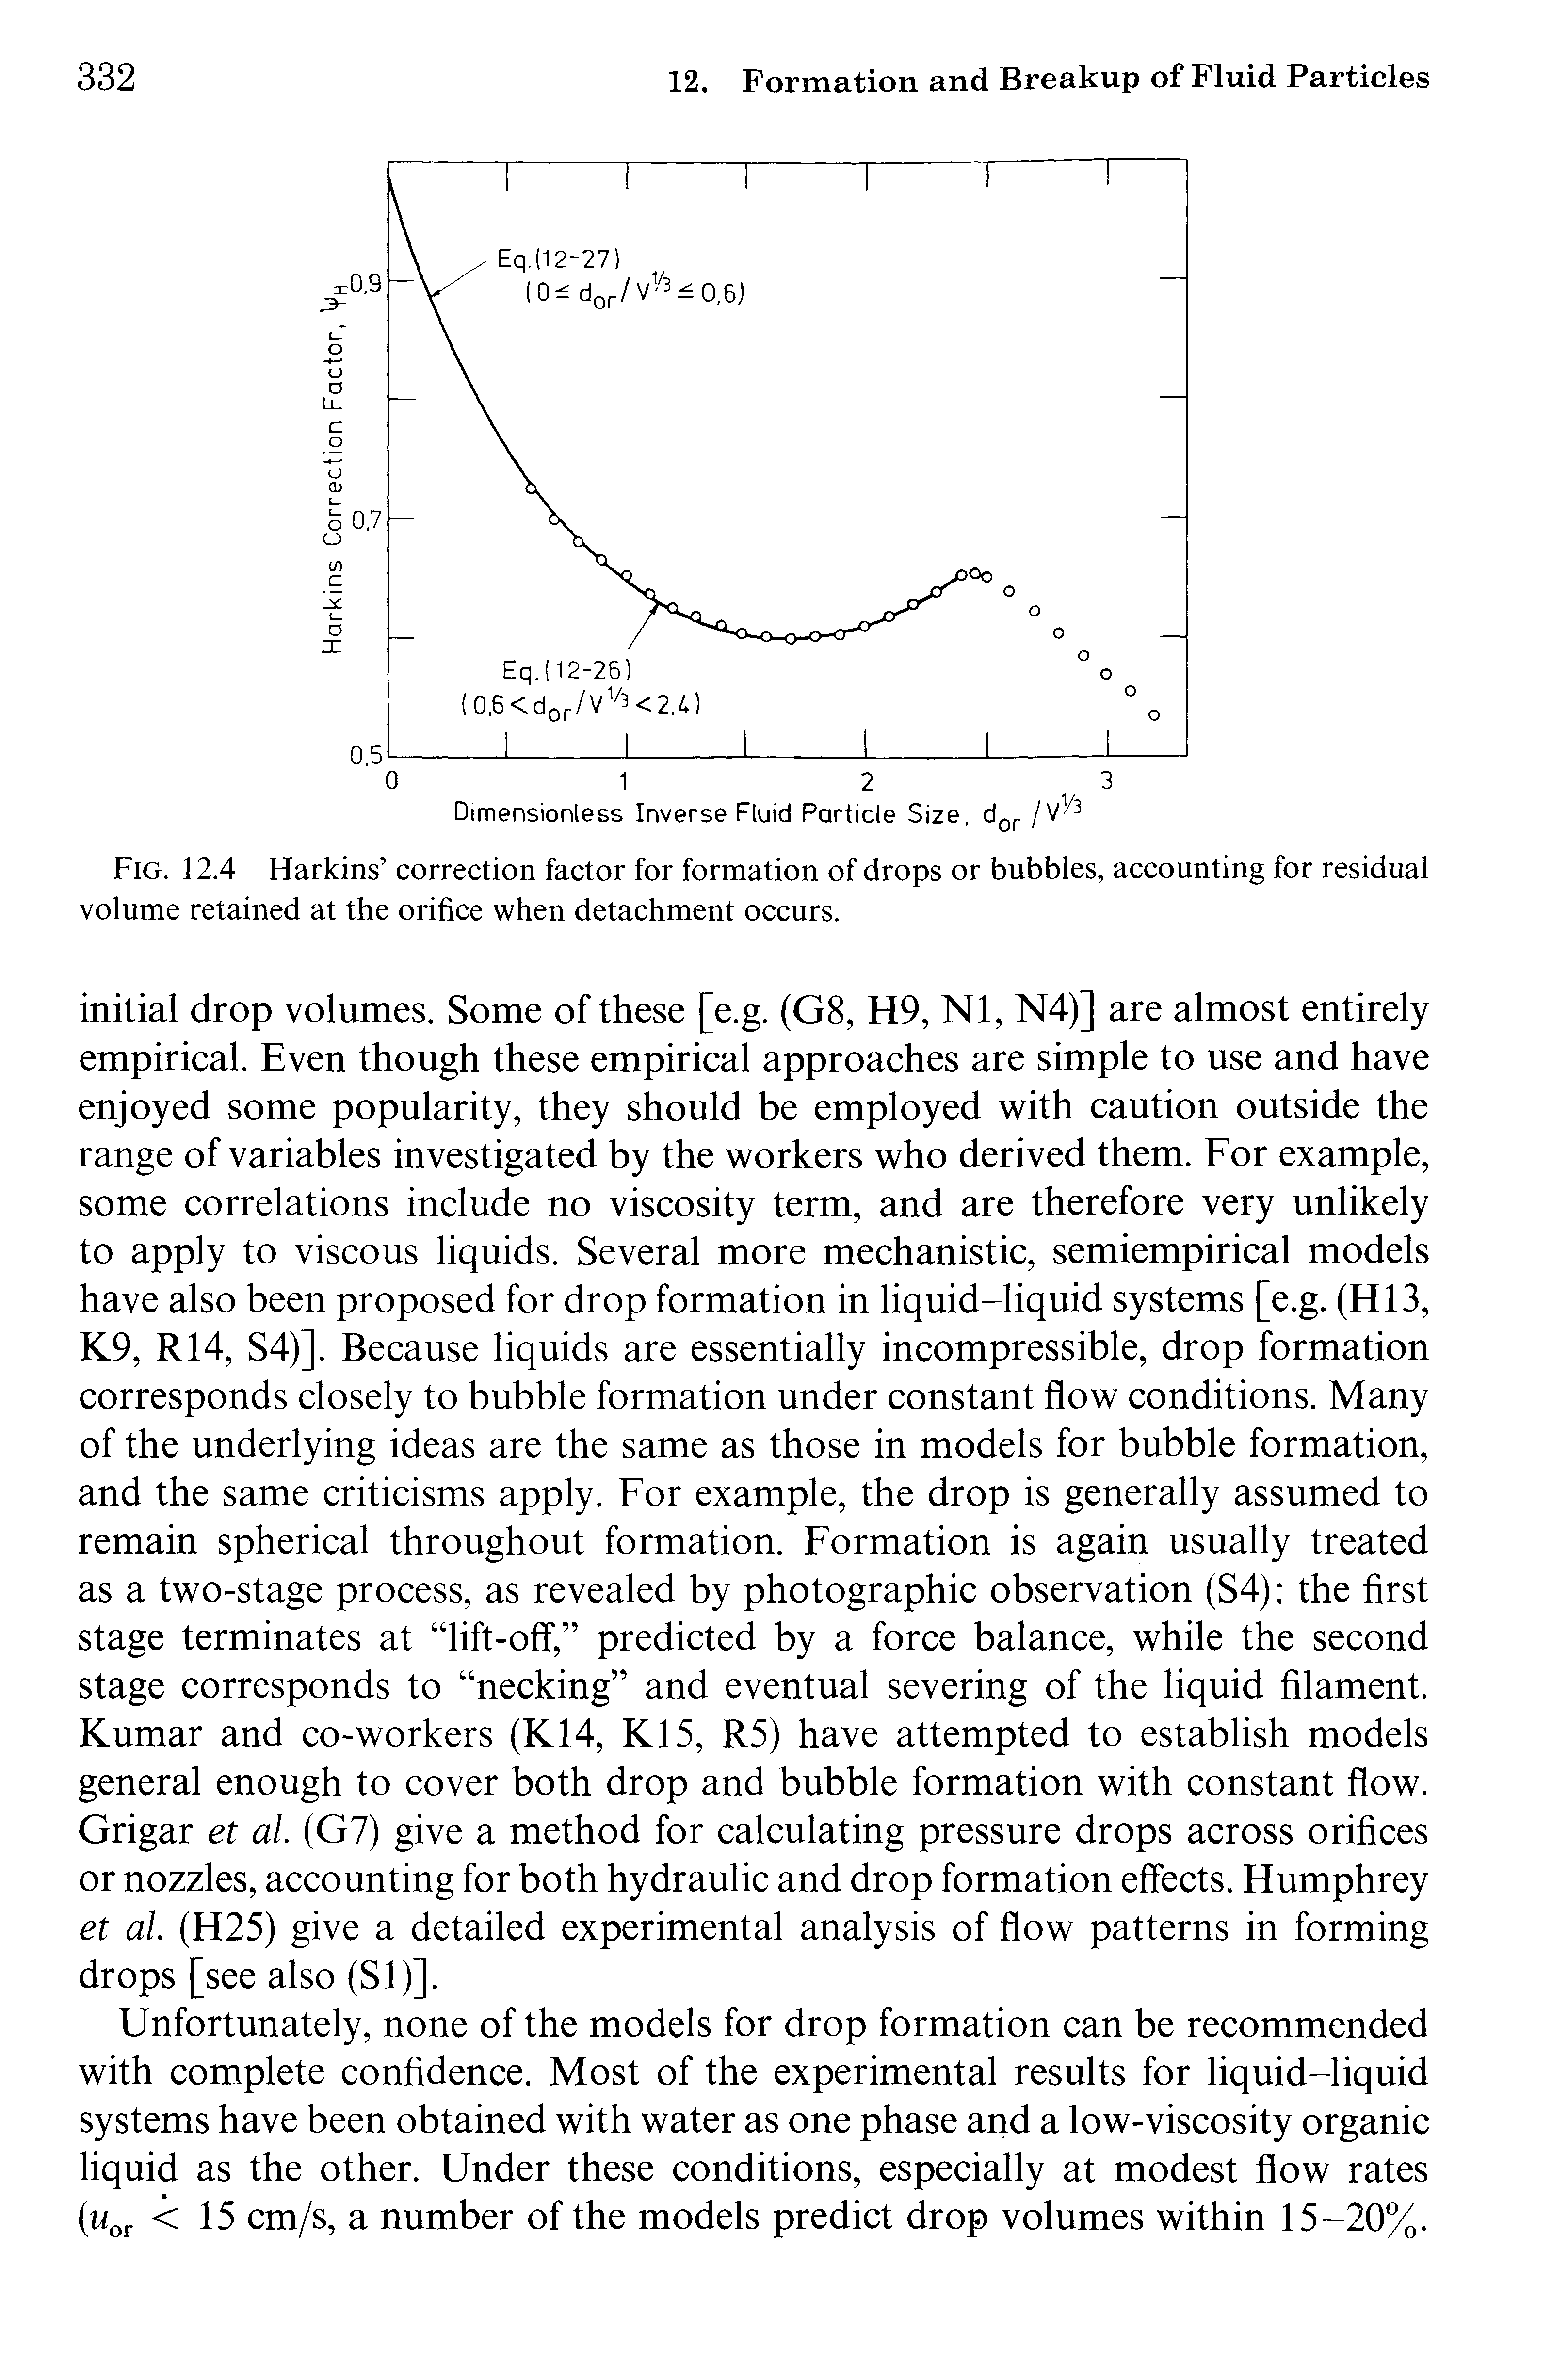 Fig. 12.4 Harkins correction factor for formation of drops or bubbles, accounting for residual volume retained at the orifice when detachment occurs.